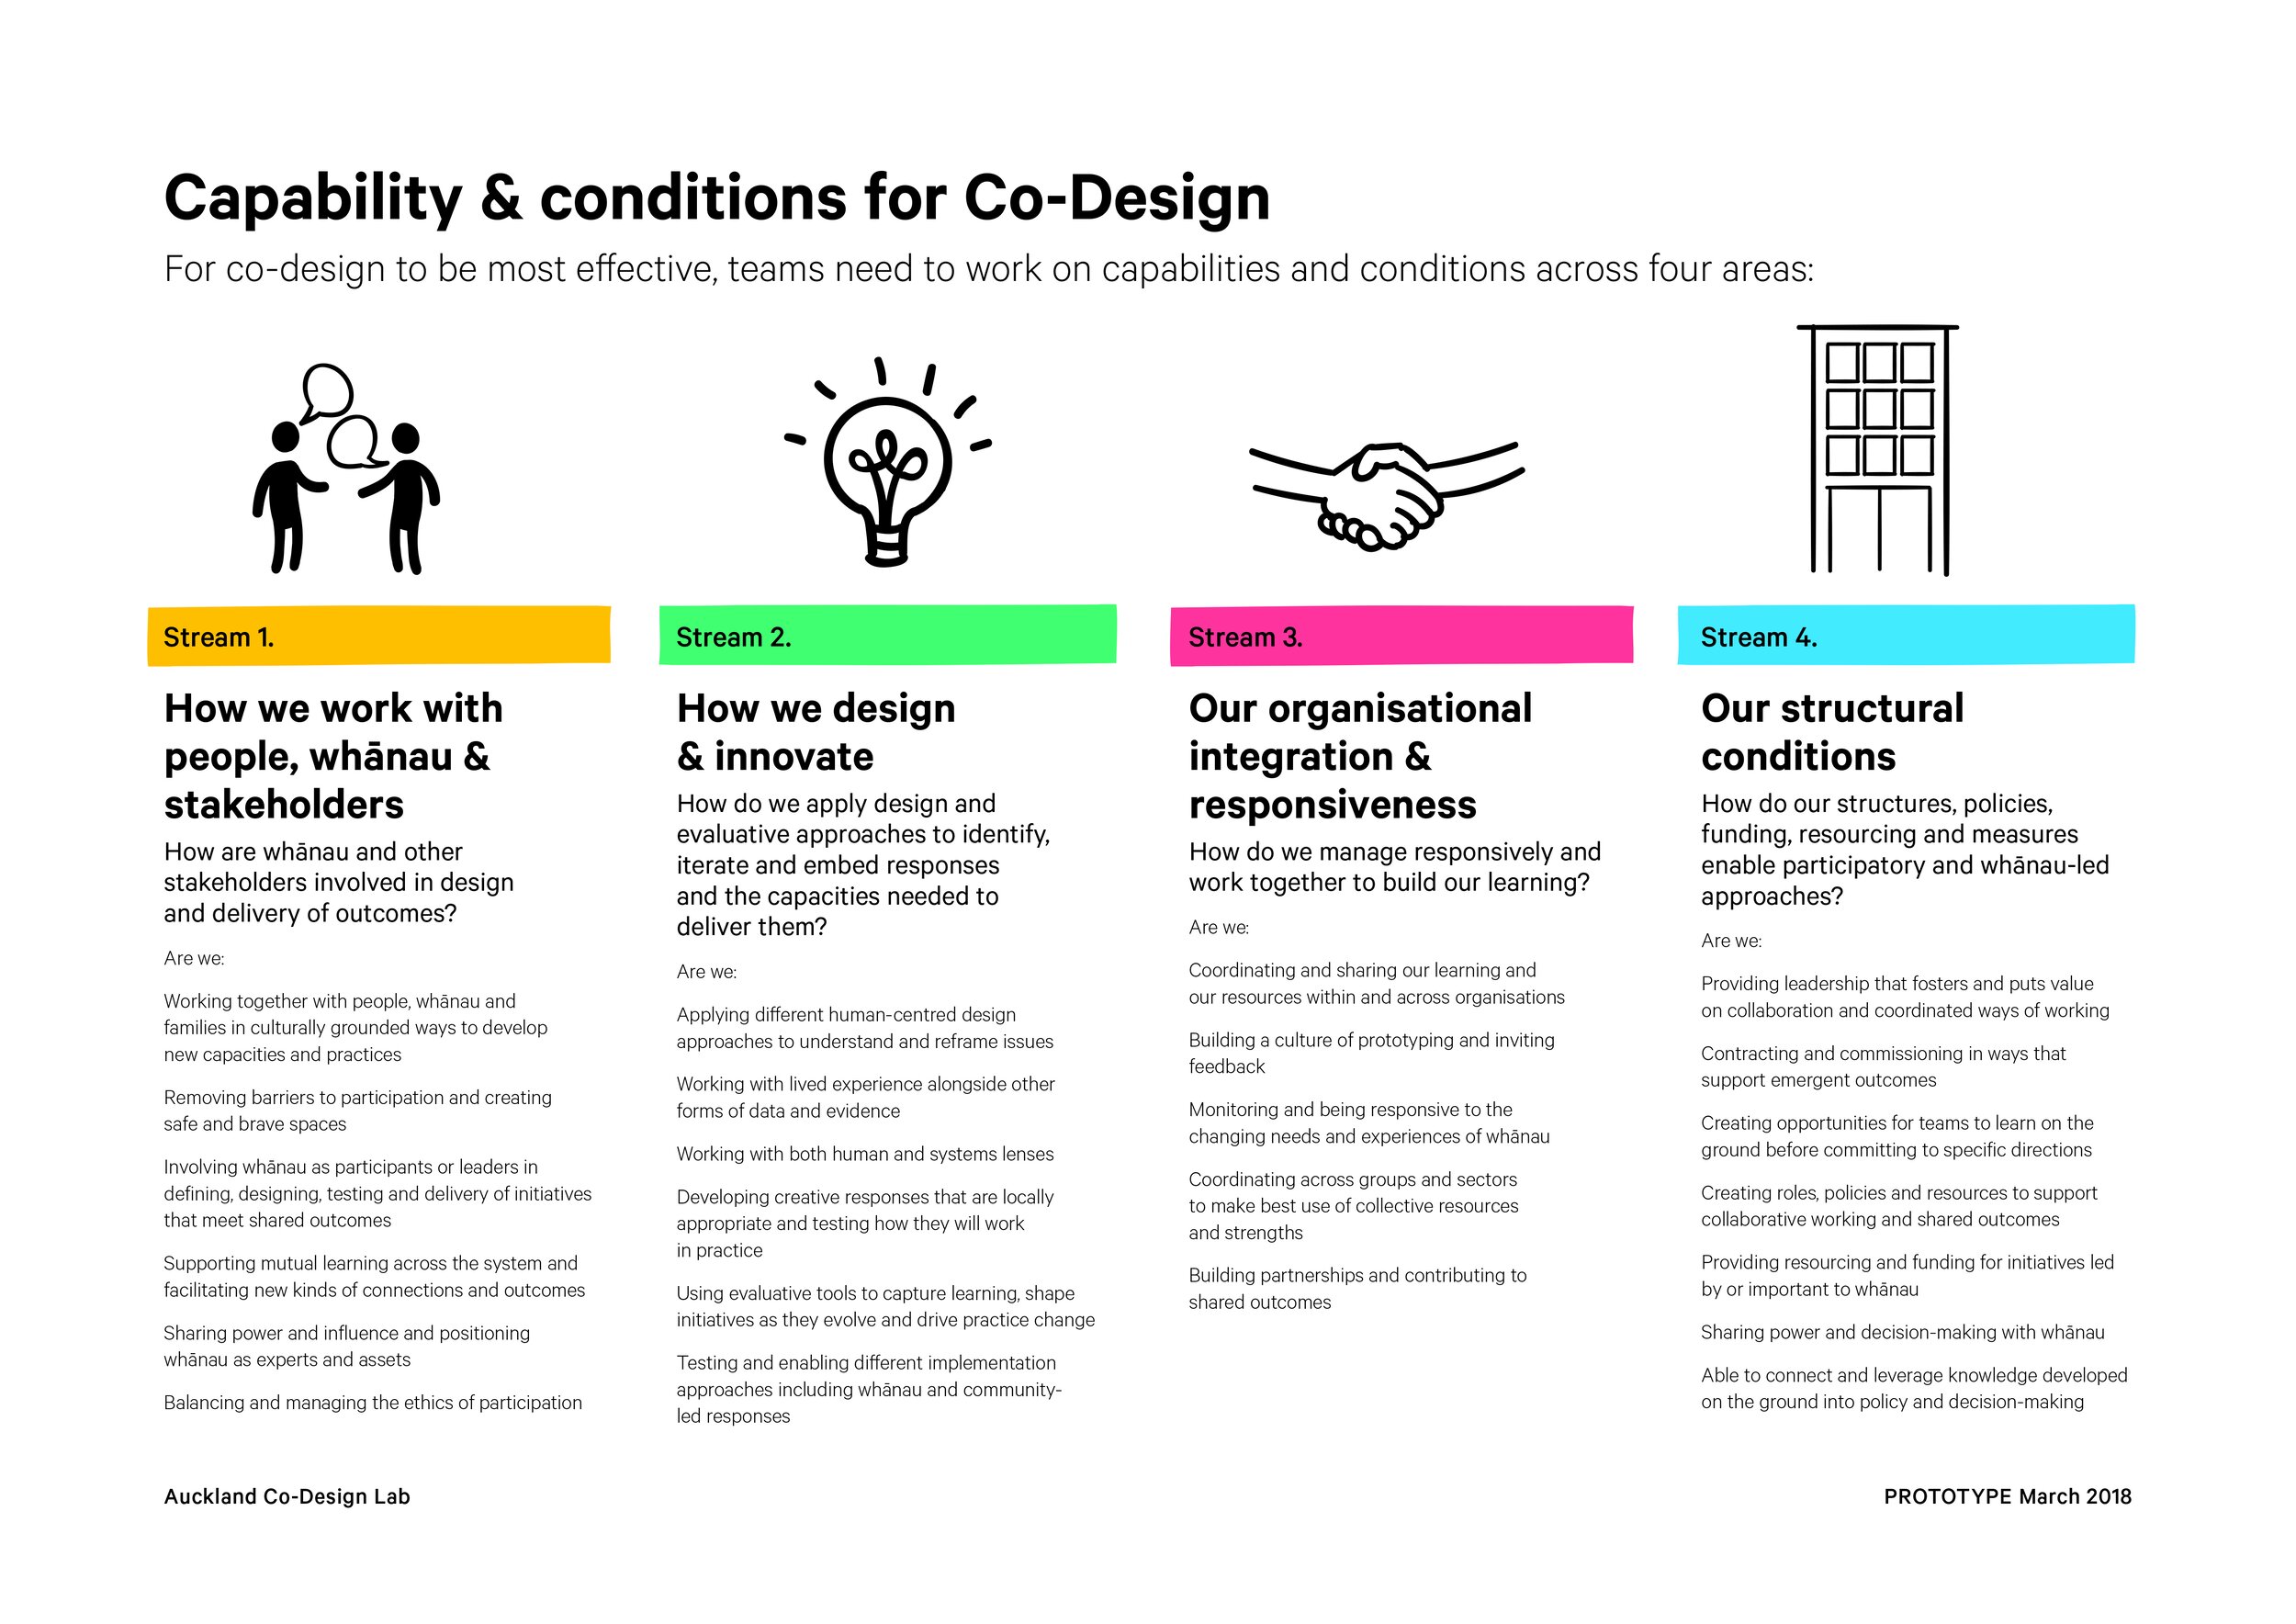 Capability+Workshop+Booklet+A3-6.jpg